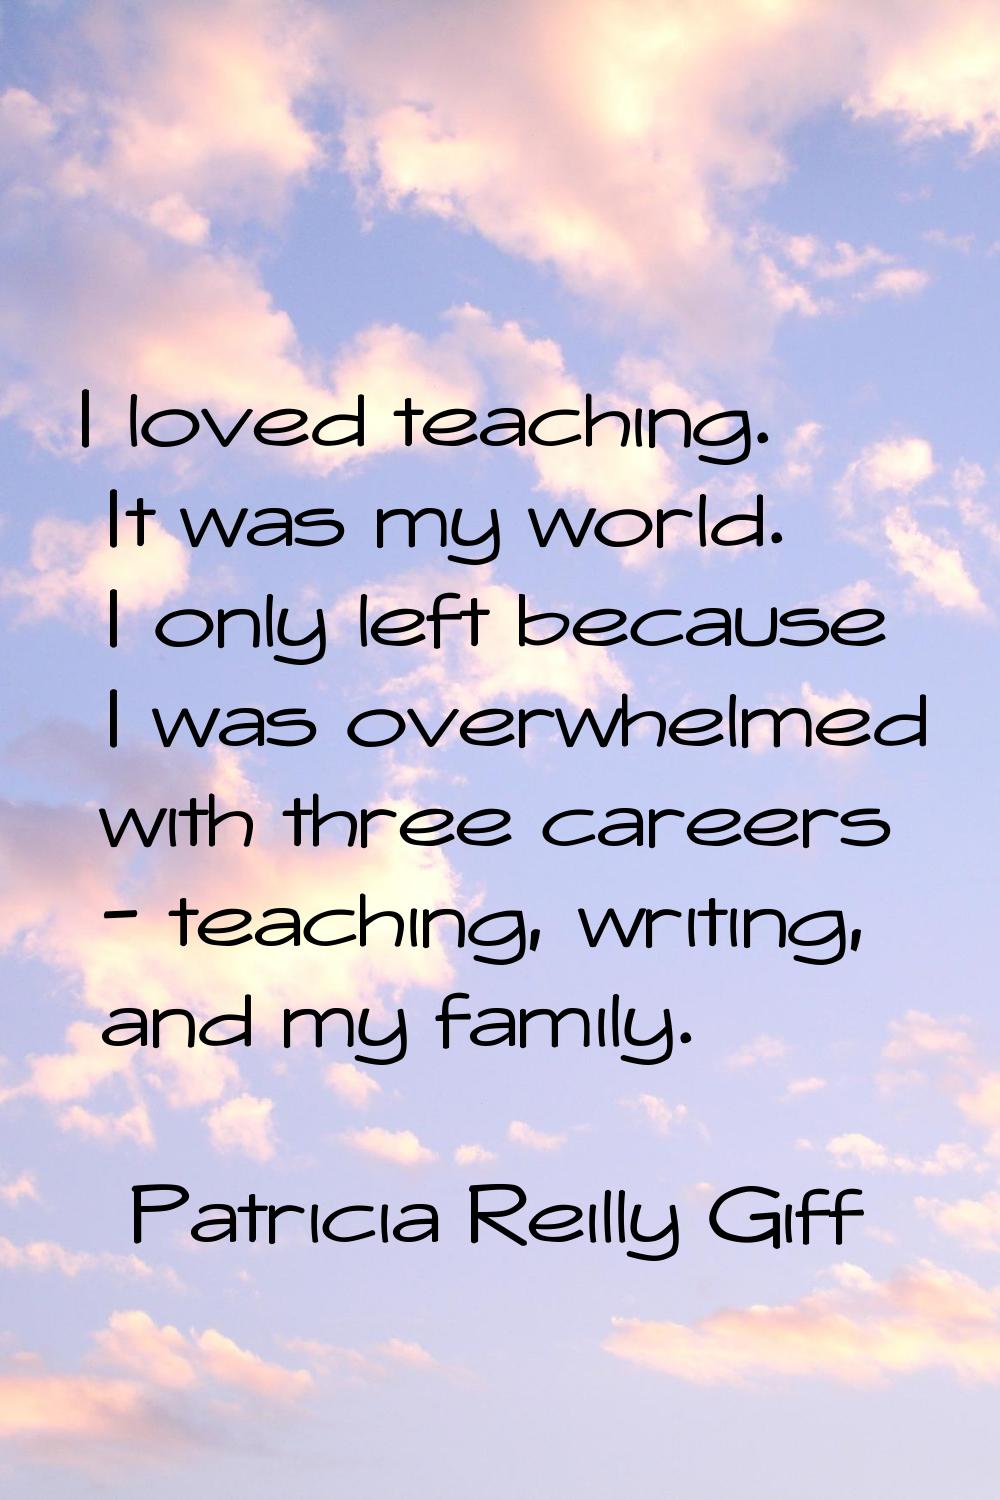 I loved teaching. It was my world. I only left because I was overwhelmed with three careers - teach